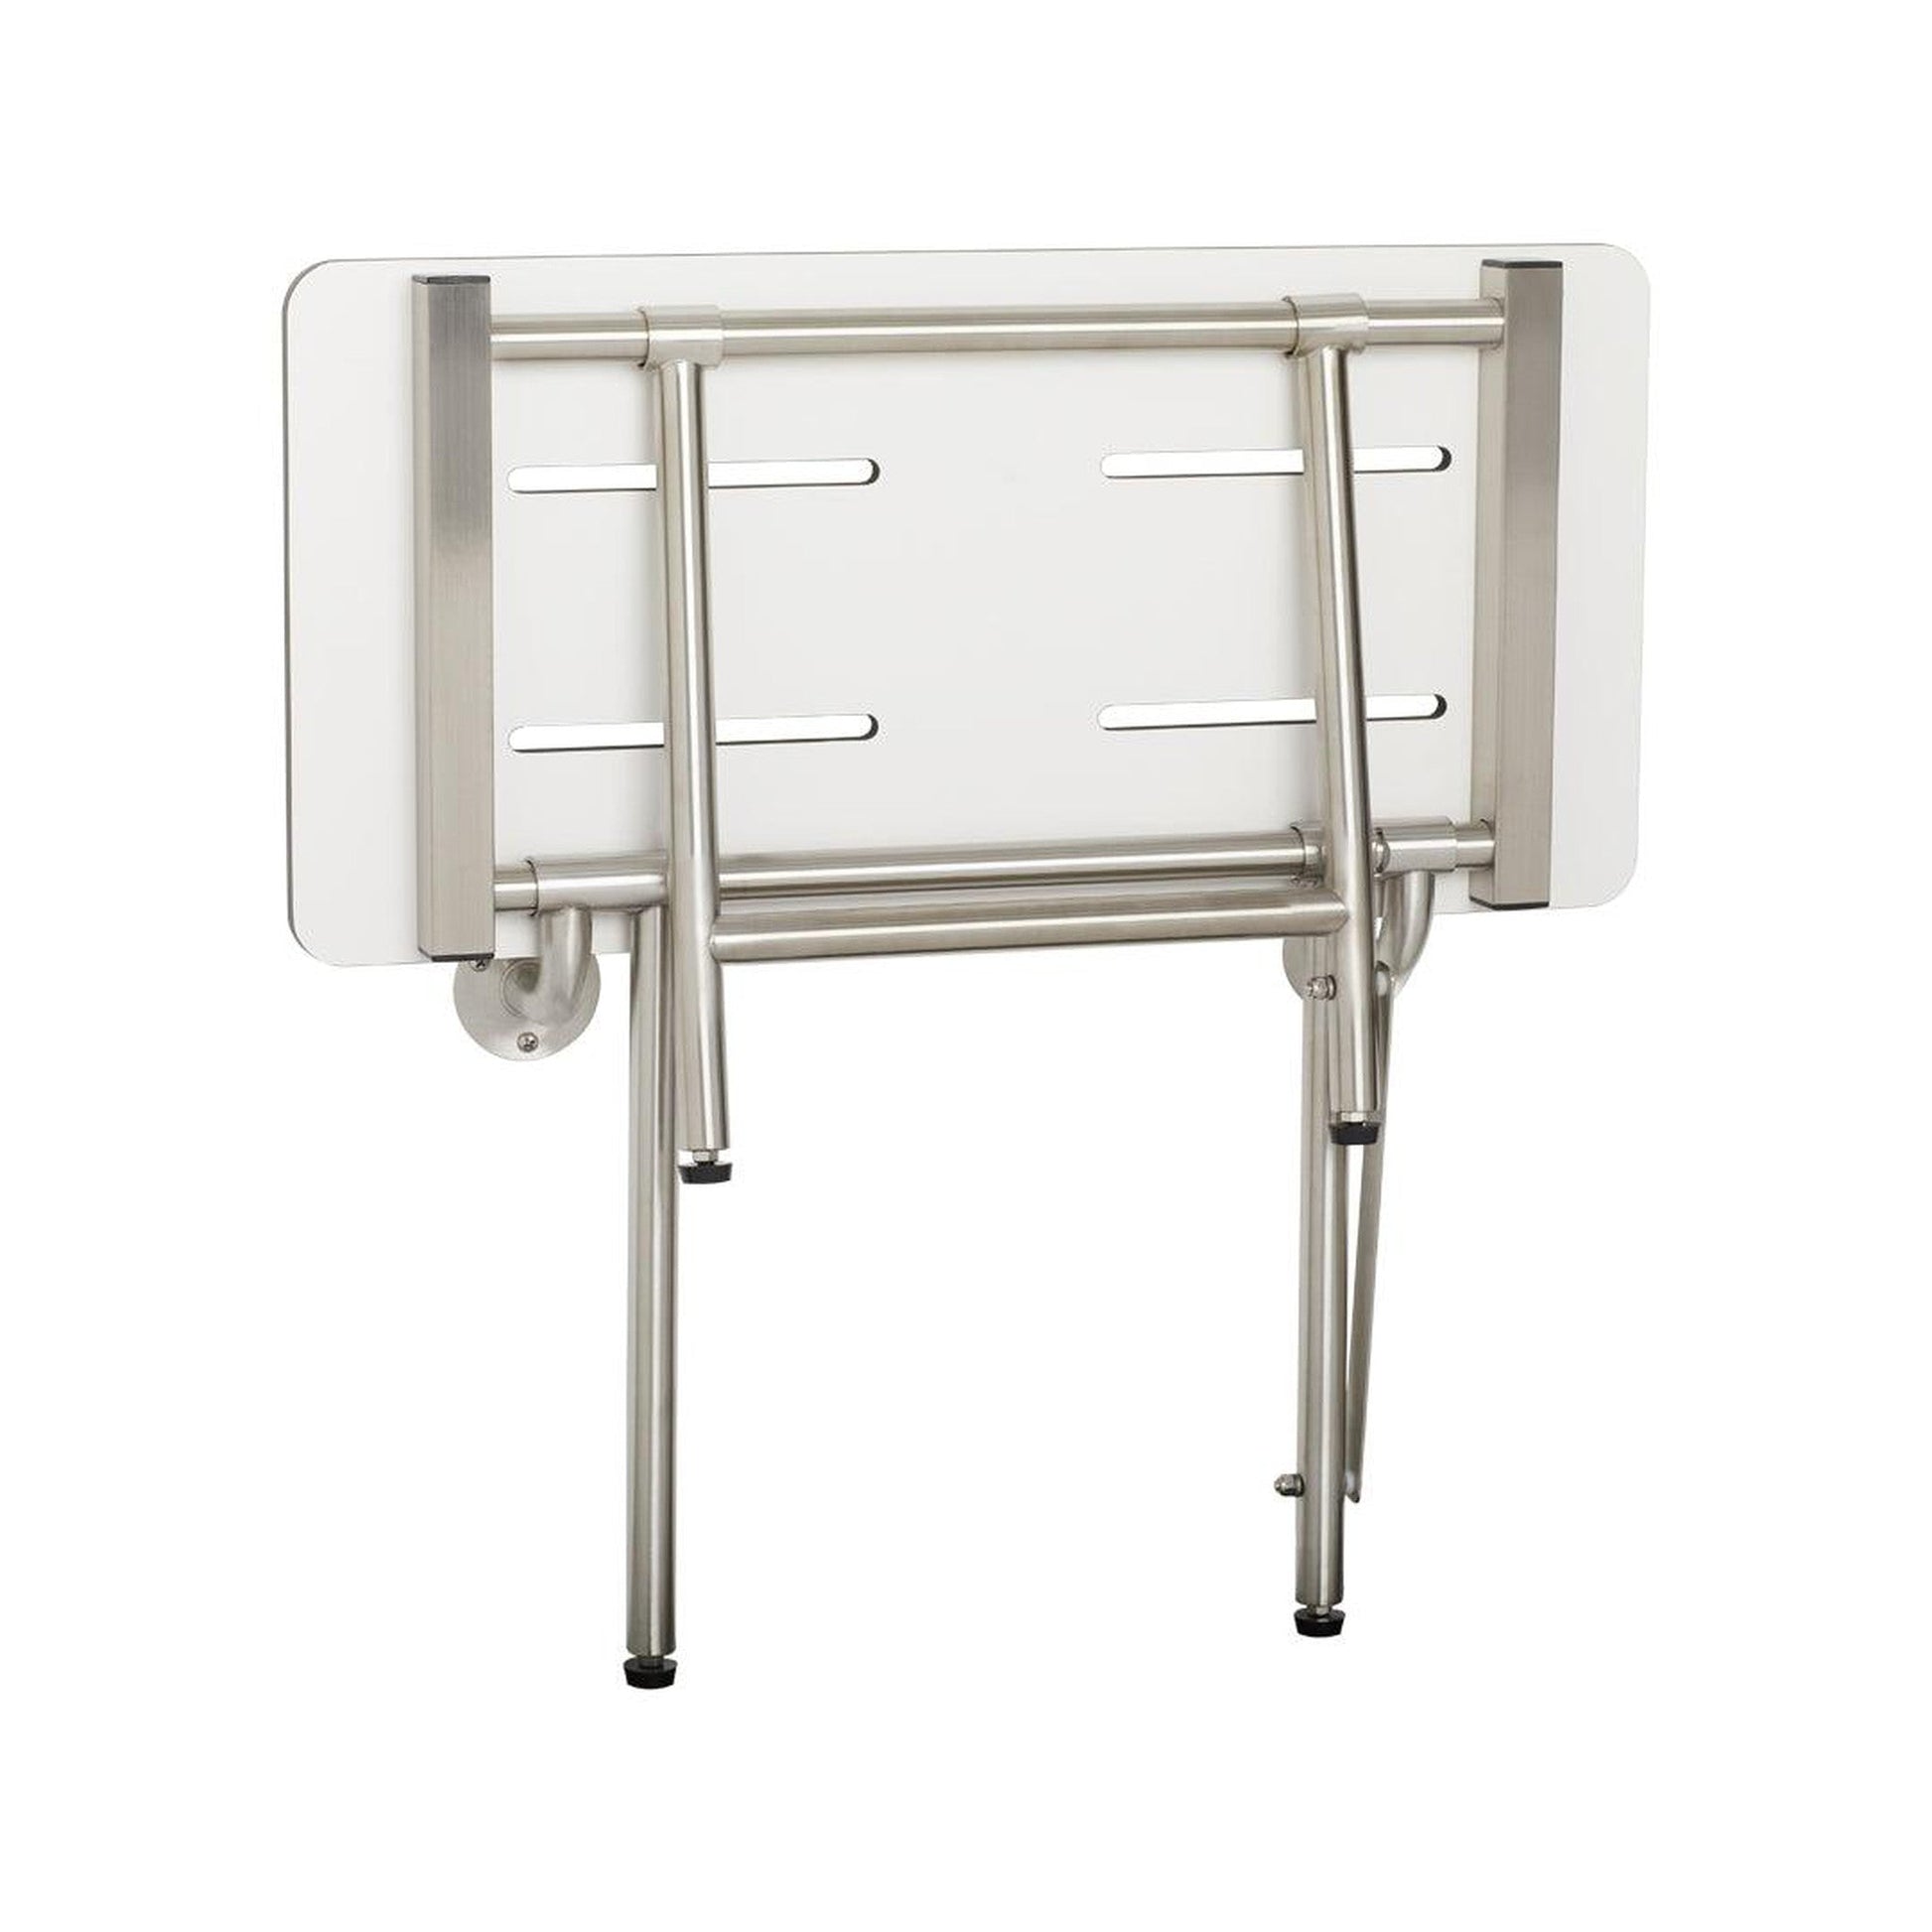 Seachrome Signature Series 22" W x 15" D White One-Piece Solid Phenolic Seat Top Bench Shower Seat With Swing-Down Legs